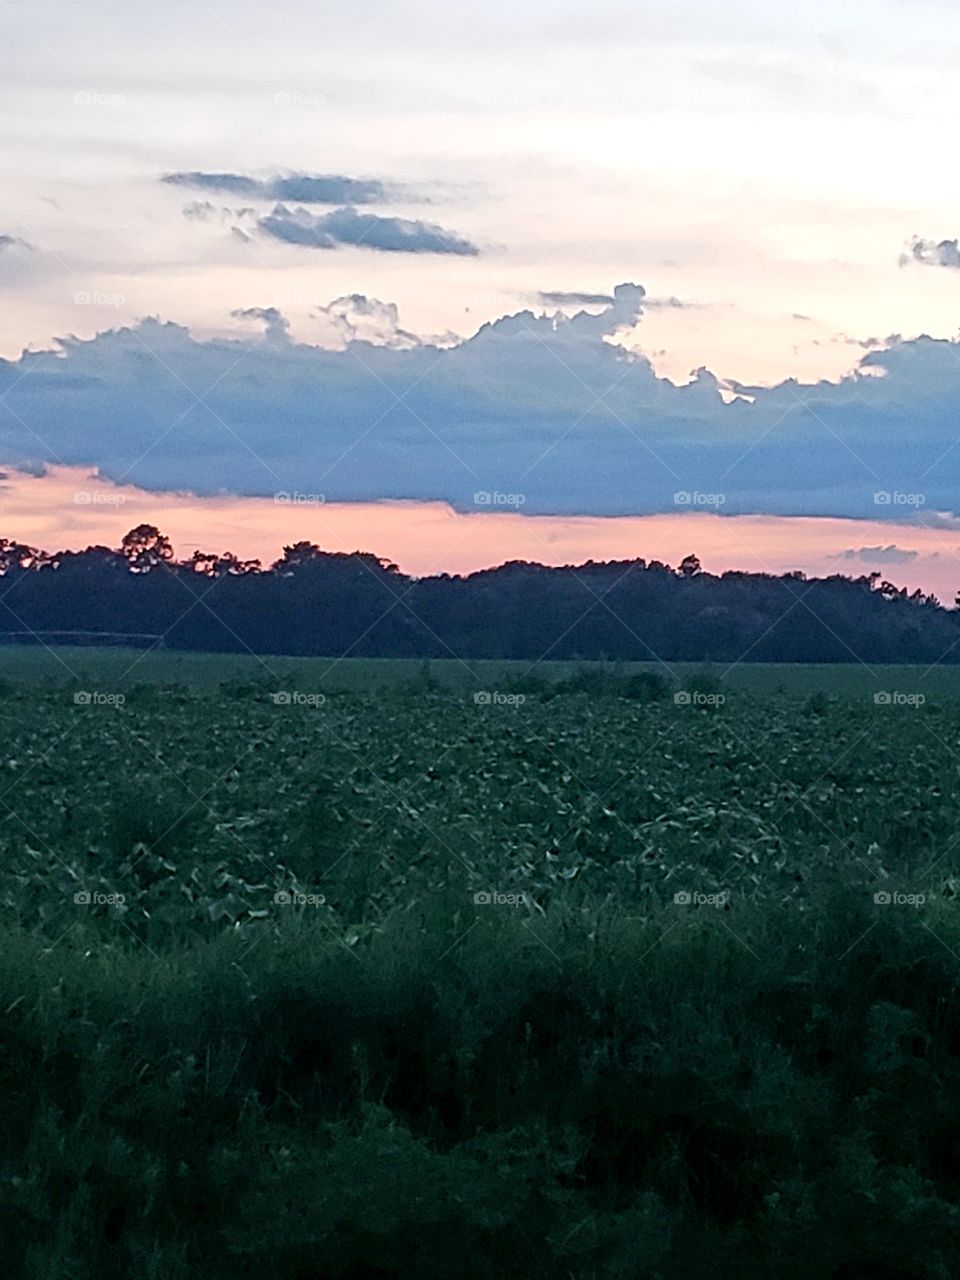 Dusk in a country field